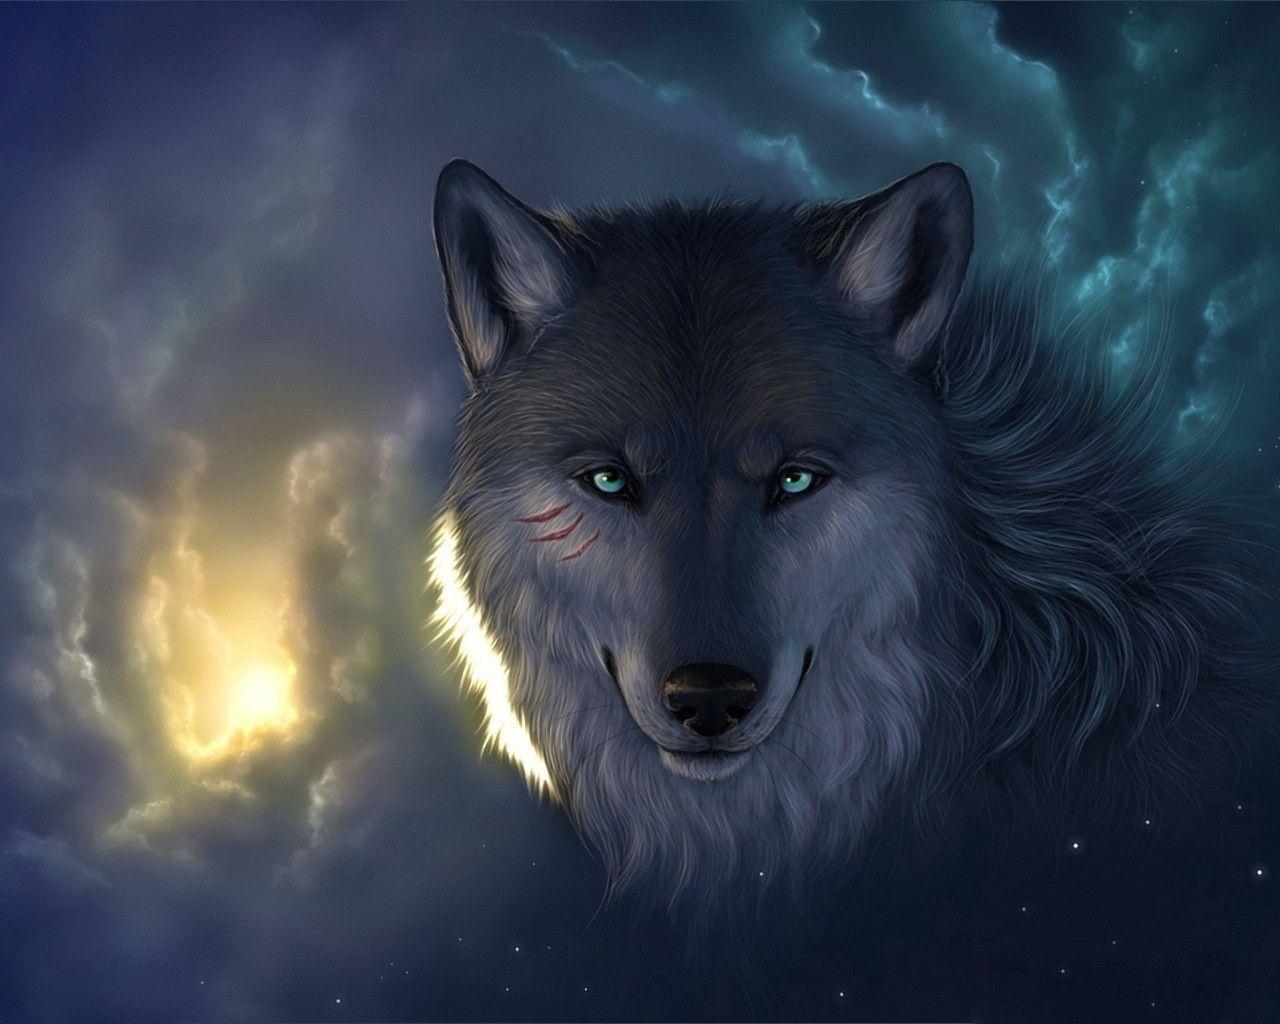 image For > Anime Wolf Wallpaper Widescreen